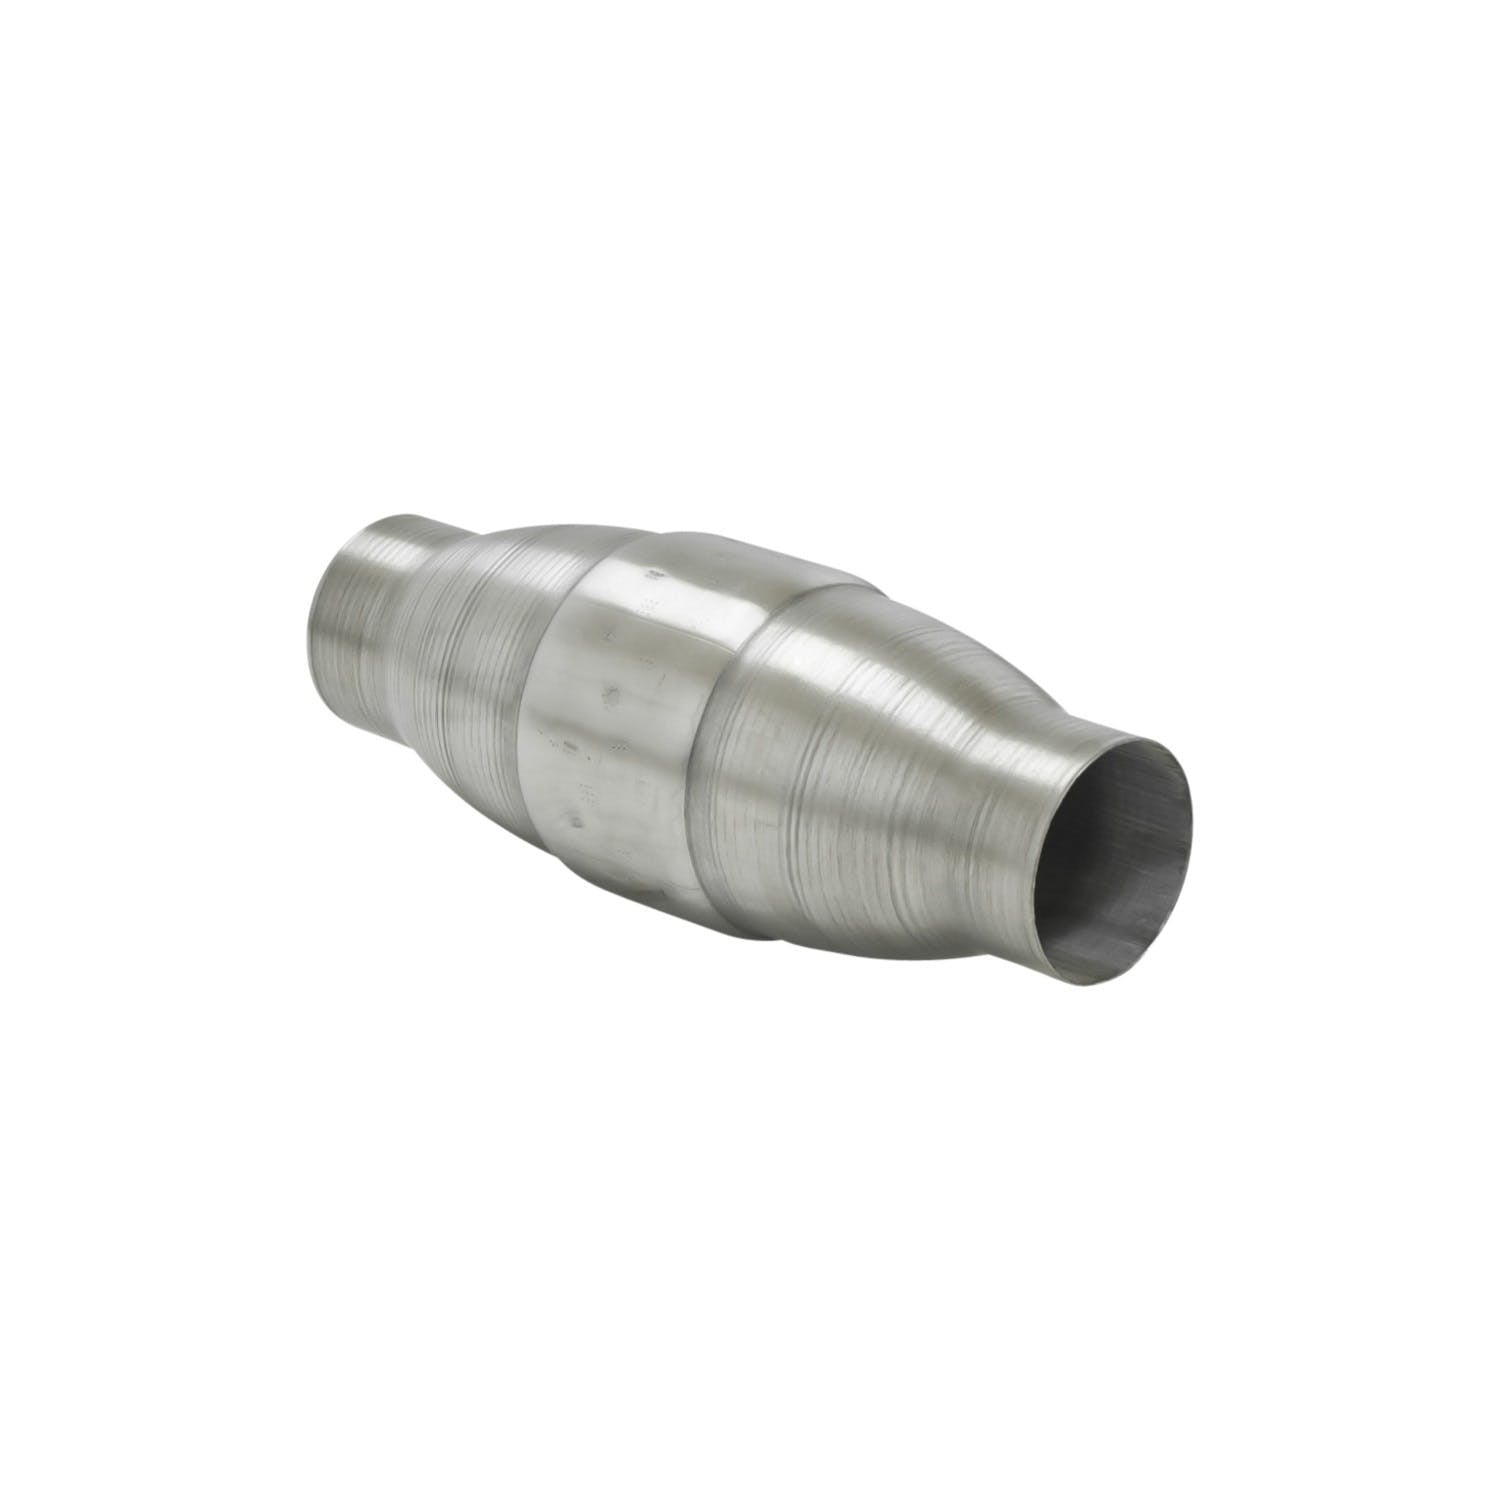 Flowmaster Catalytic Converters 2000130 Catalytic Converter-Universal-200 Series-3.00 in. Inlet/Outlet-49 State